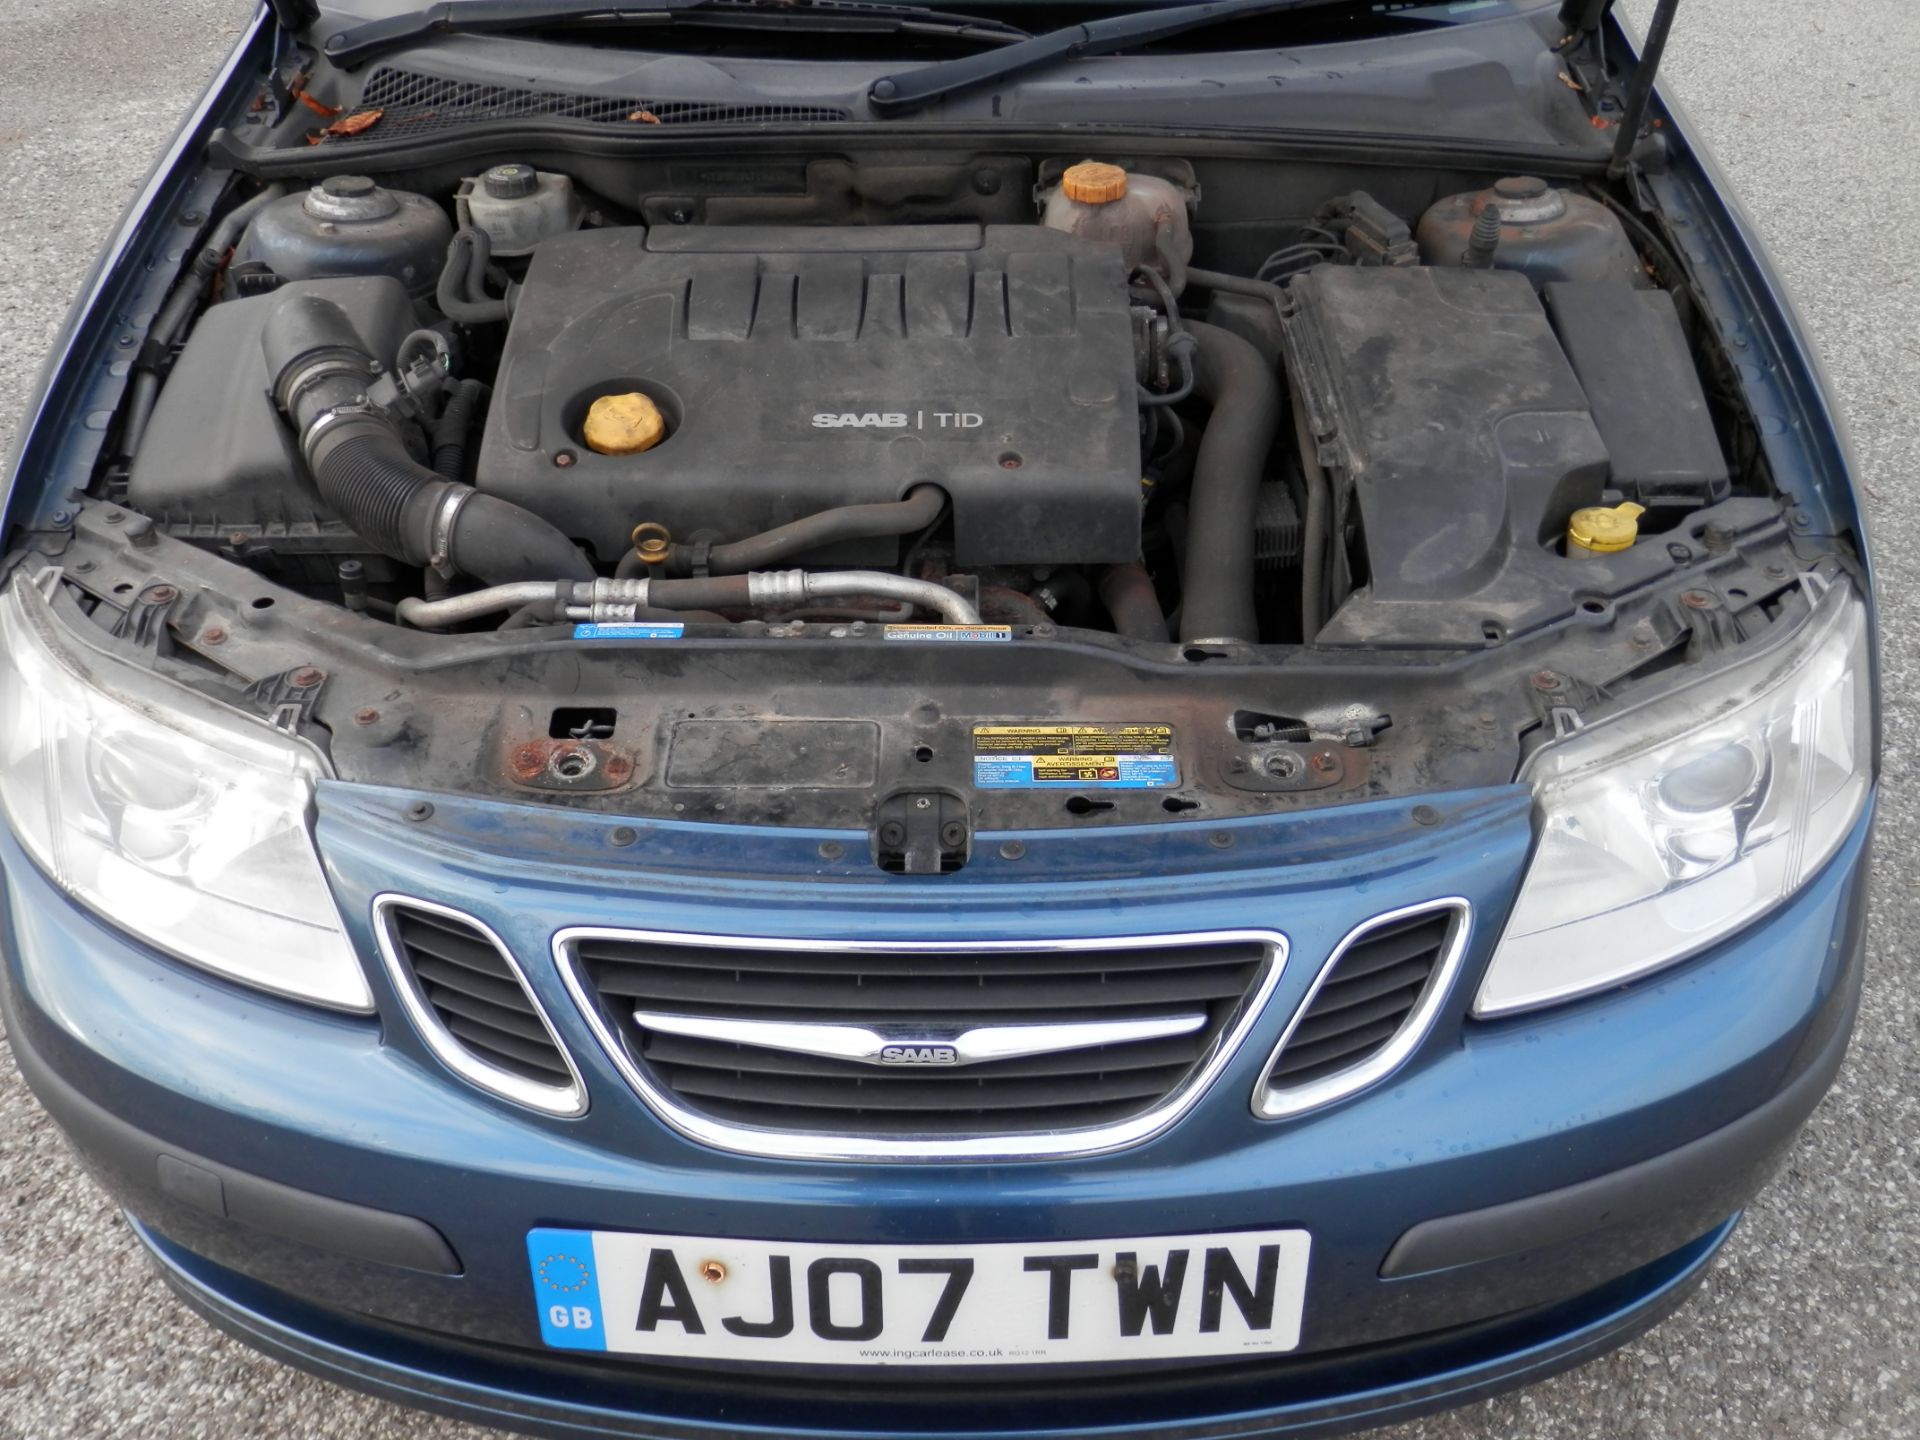 NOW WITH NO RESERVE !! 2007/07 SAAB 93 SPORTWAGON 1.9 TID 120 BHP, 6 SPEED MANUAL, MOT MARCH 2007. - Image 23 of 25